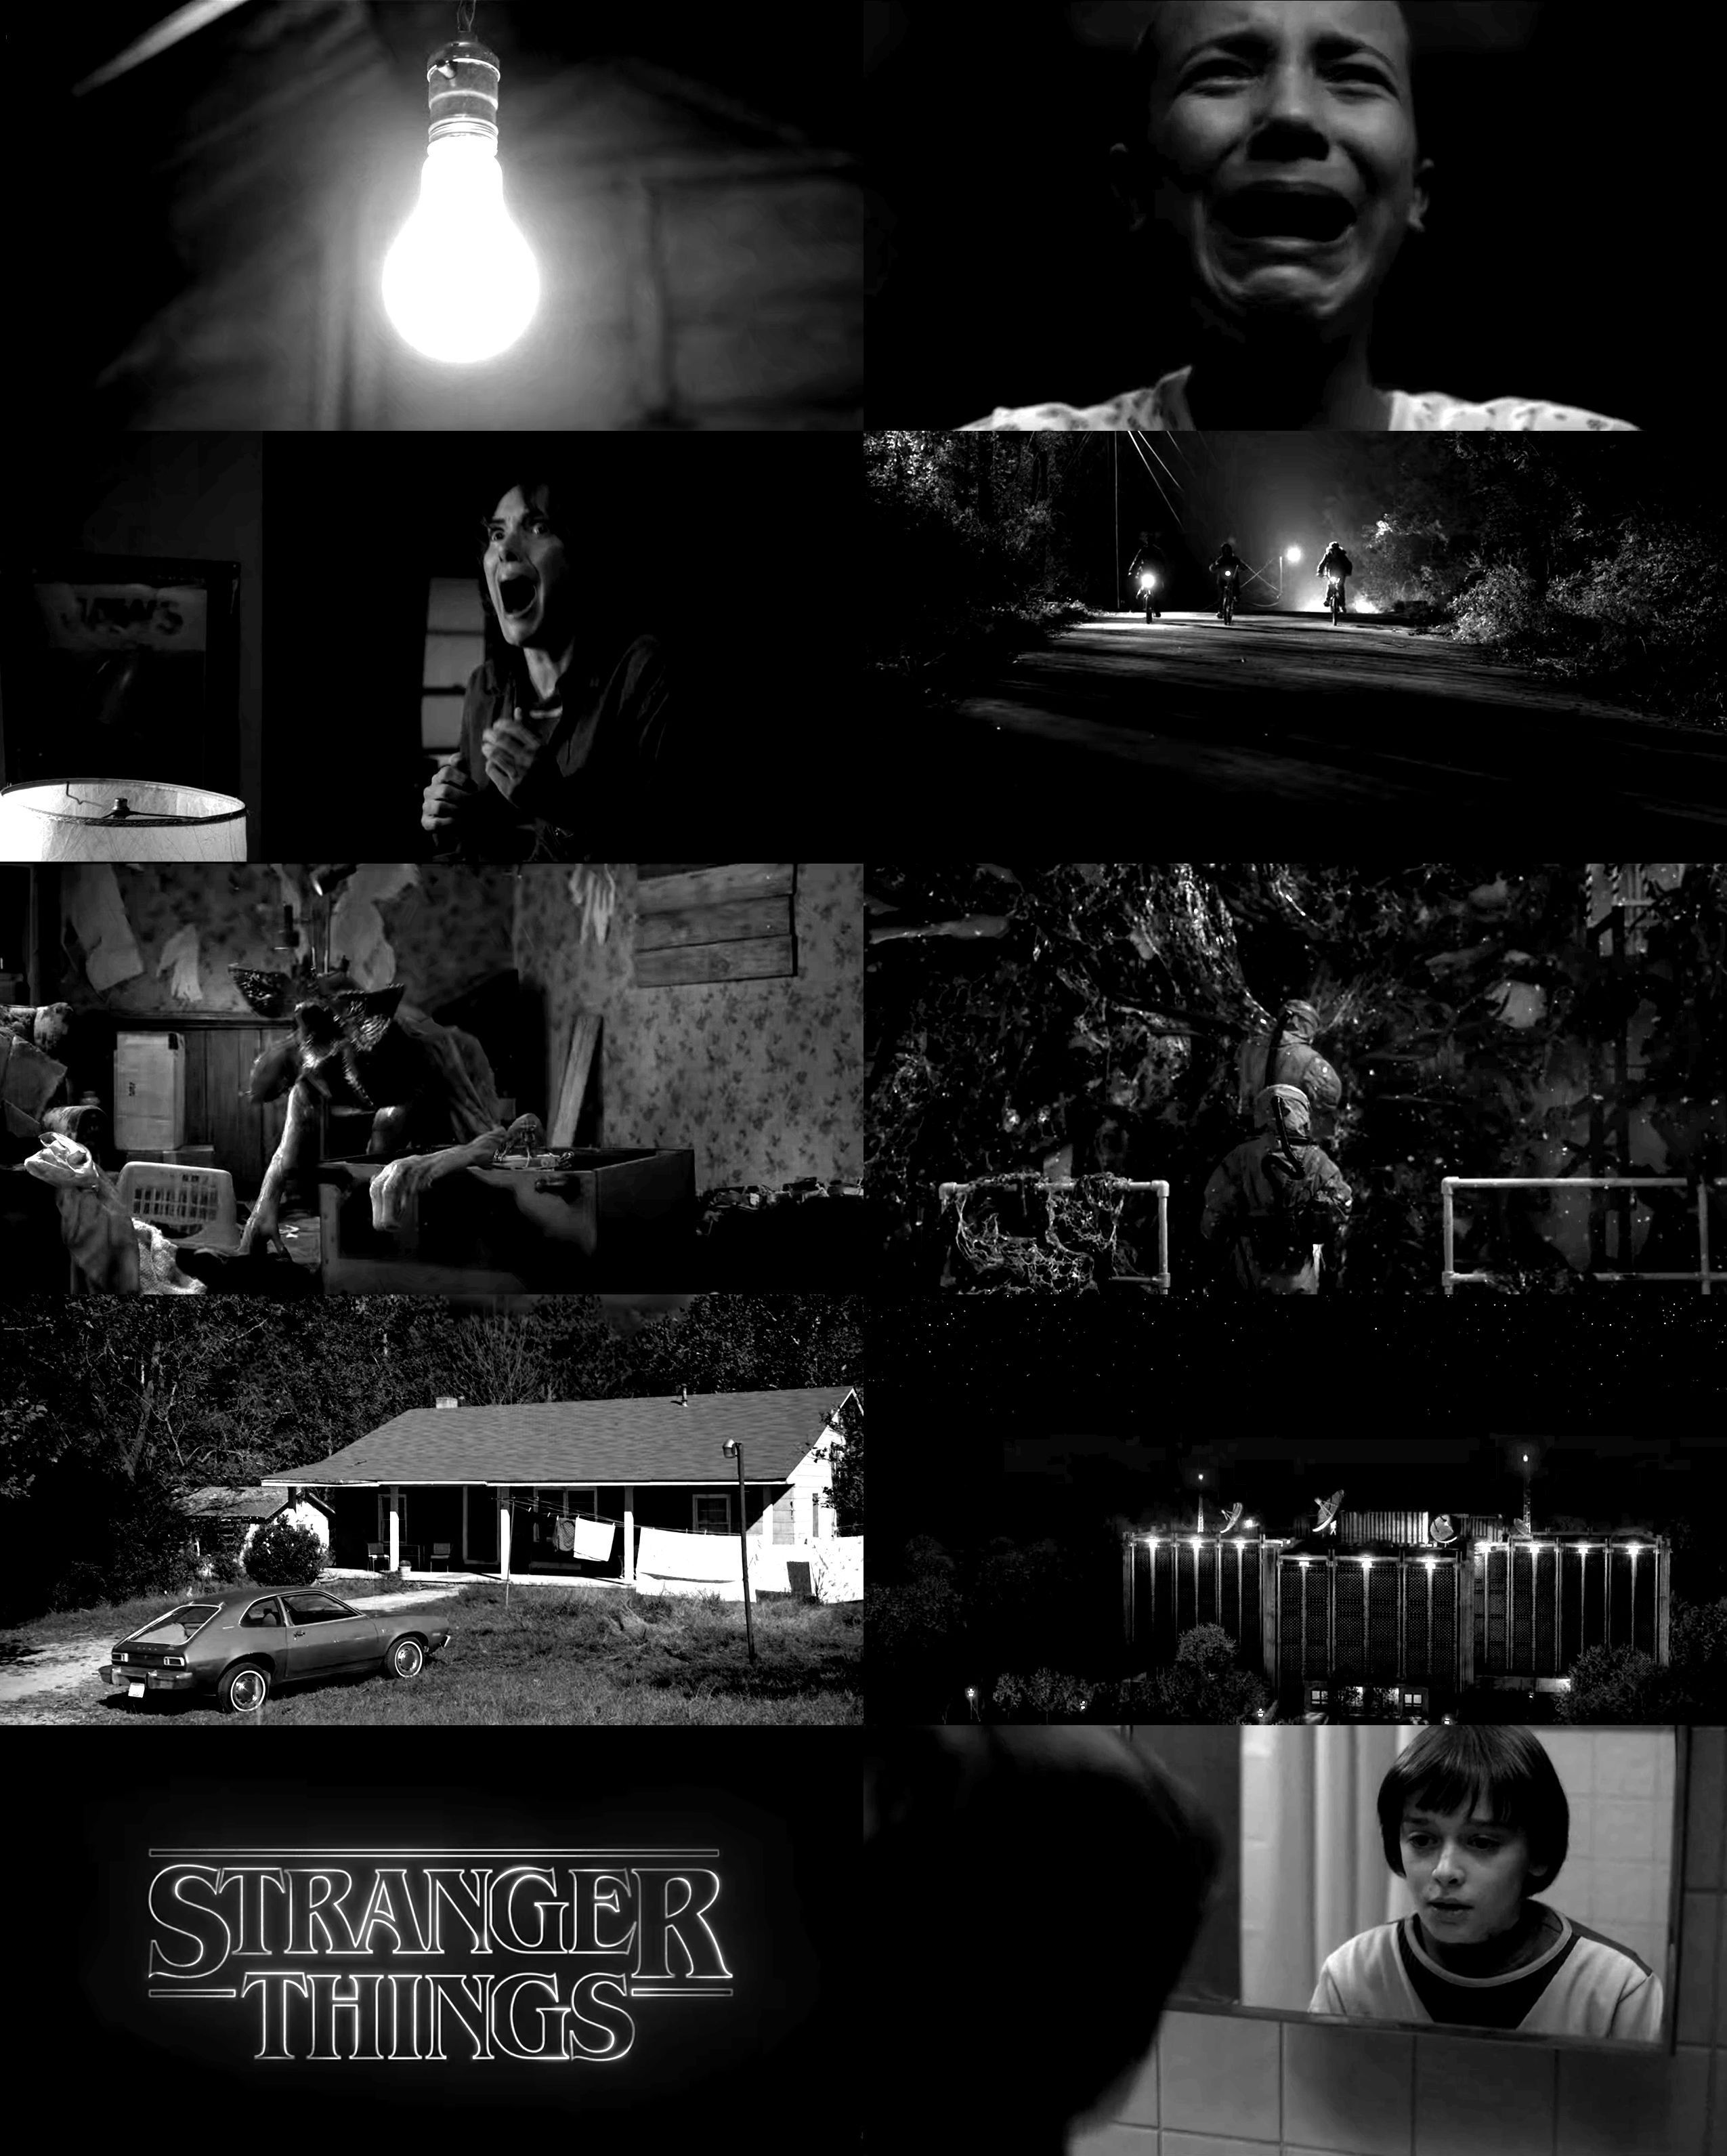 Stranger Things as a Black and White Horror movie. Like the aesthetic of Psycho 1960